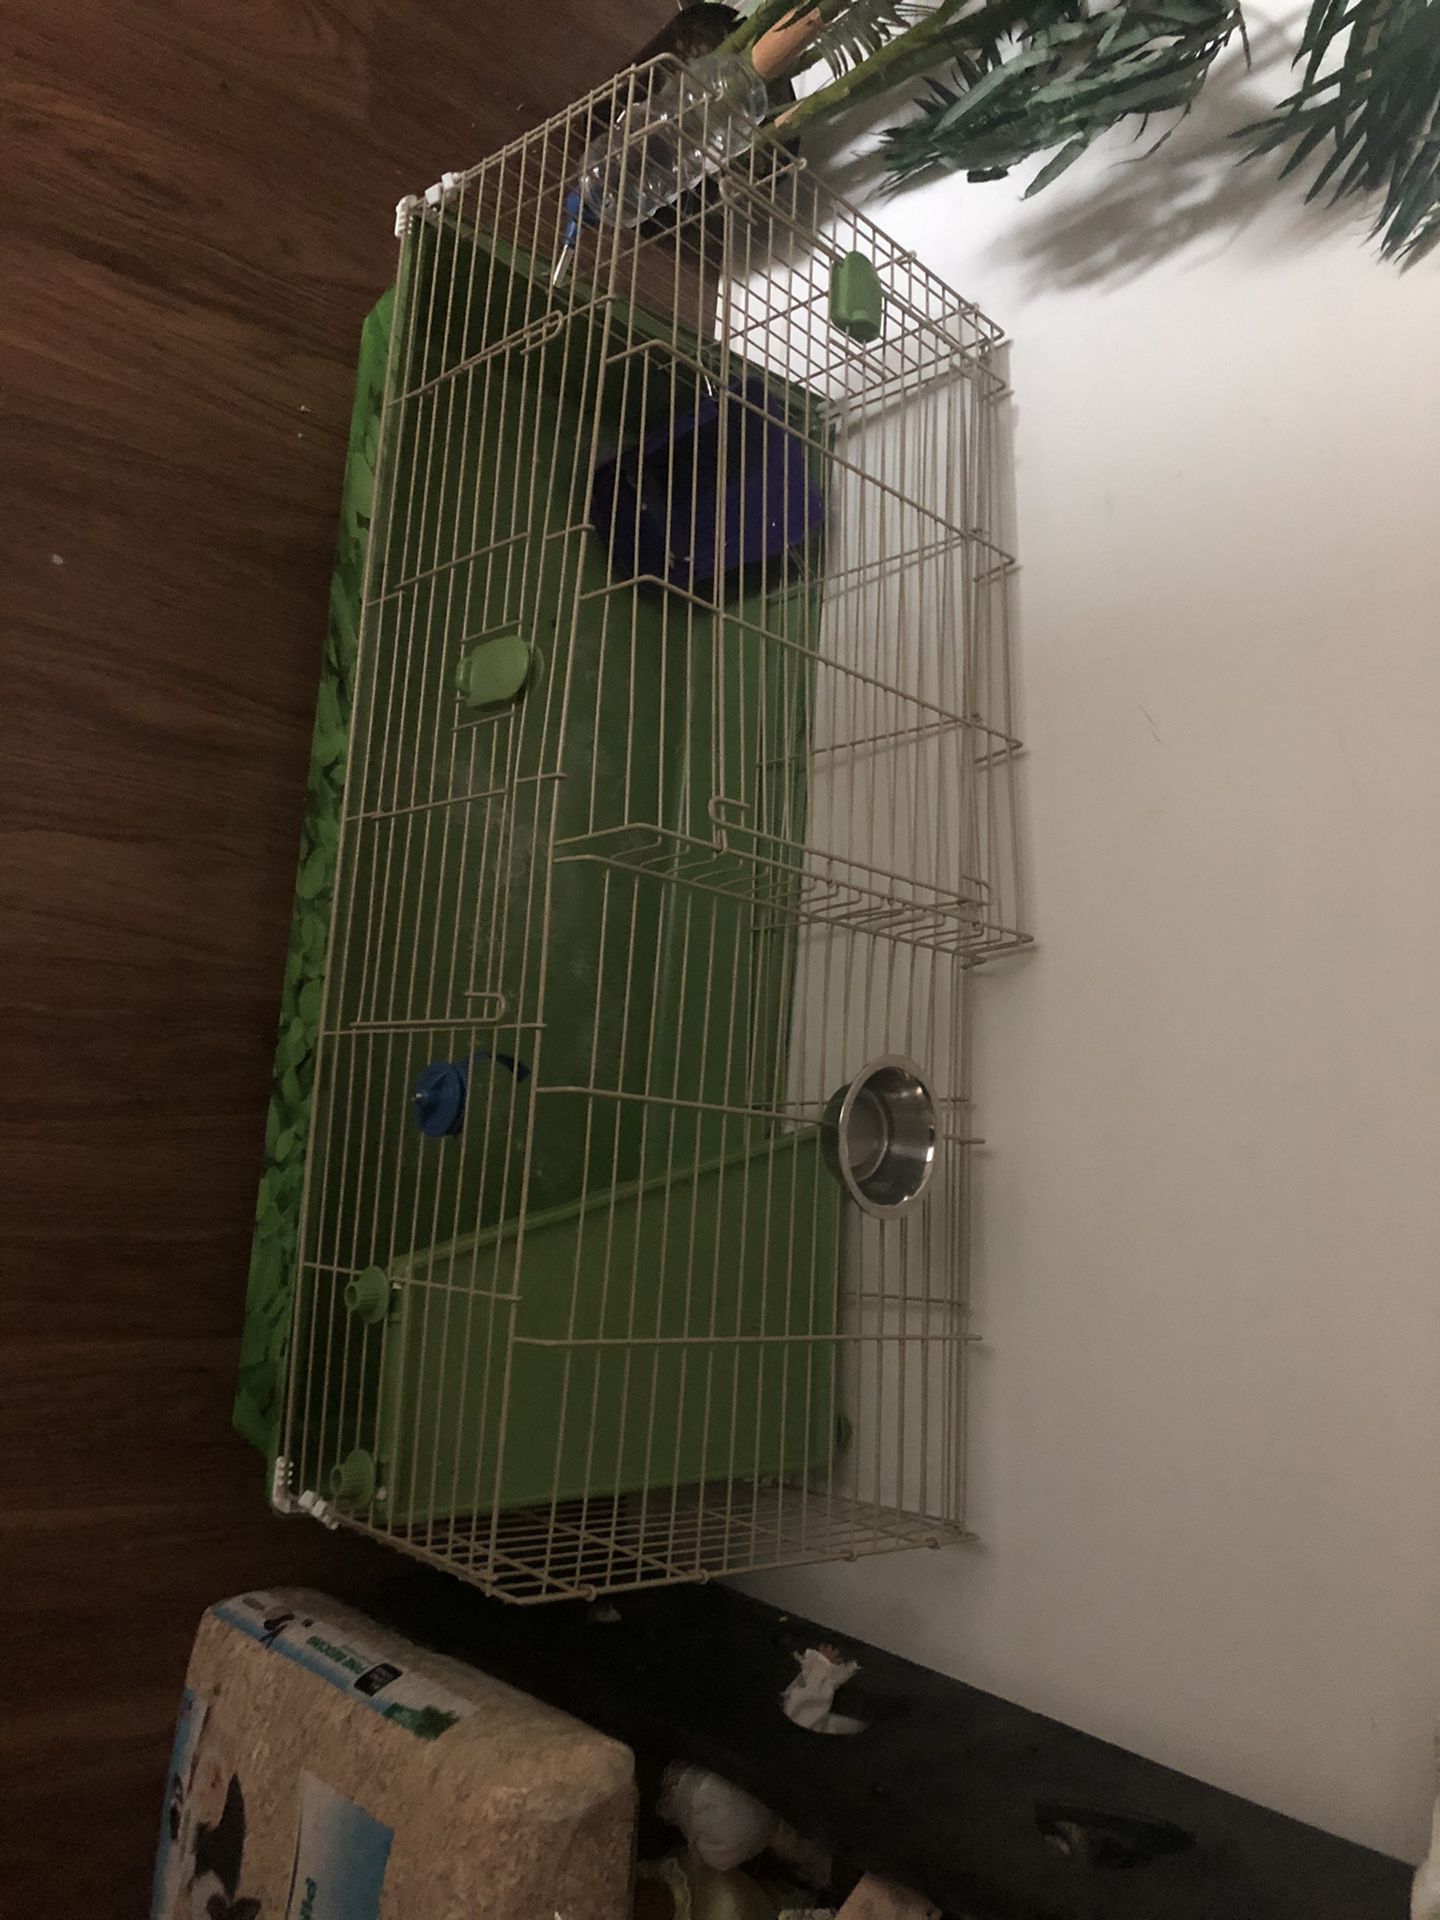 Cage for rabbit and item for inside